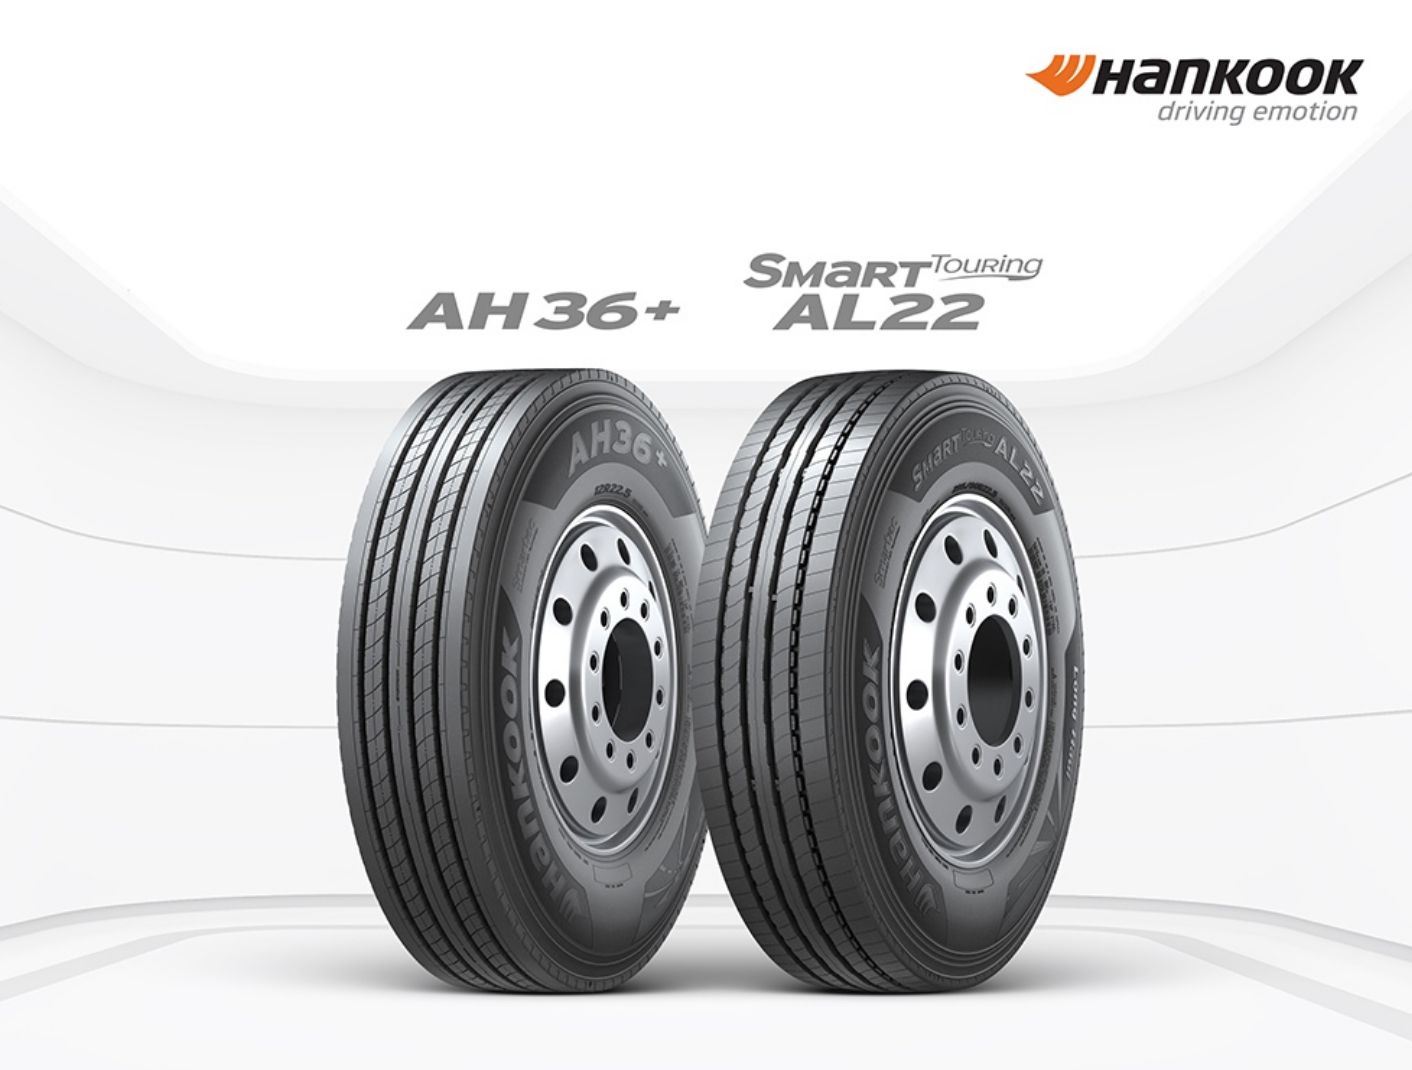 Hankook Tire pilot tests a new driving optimization solution